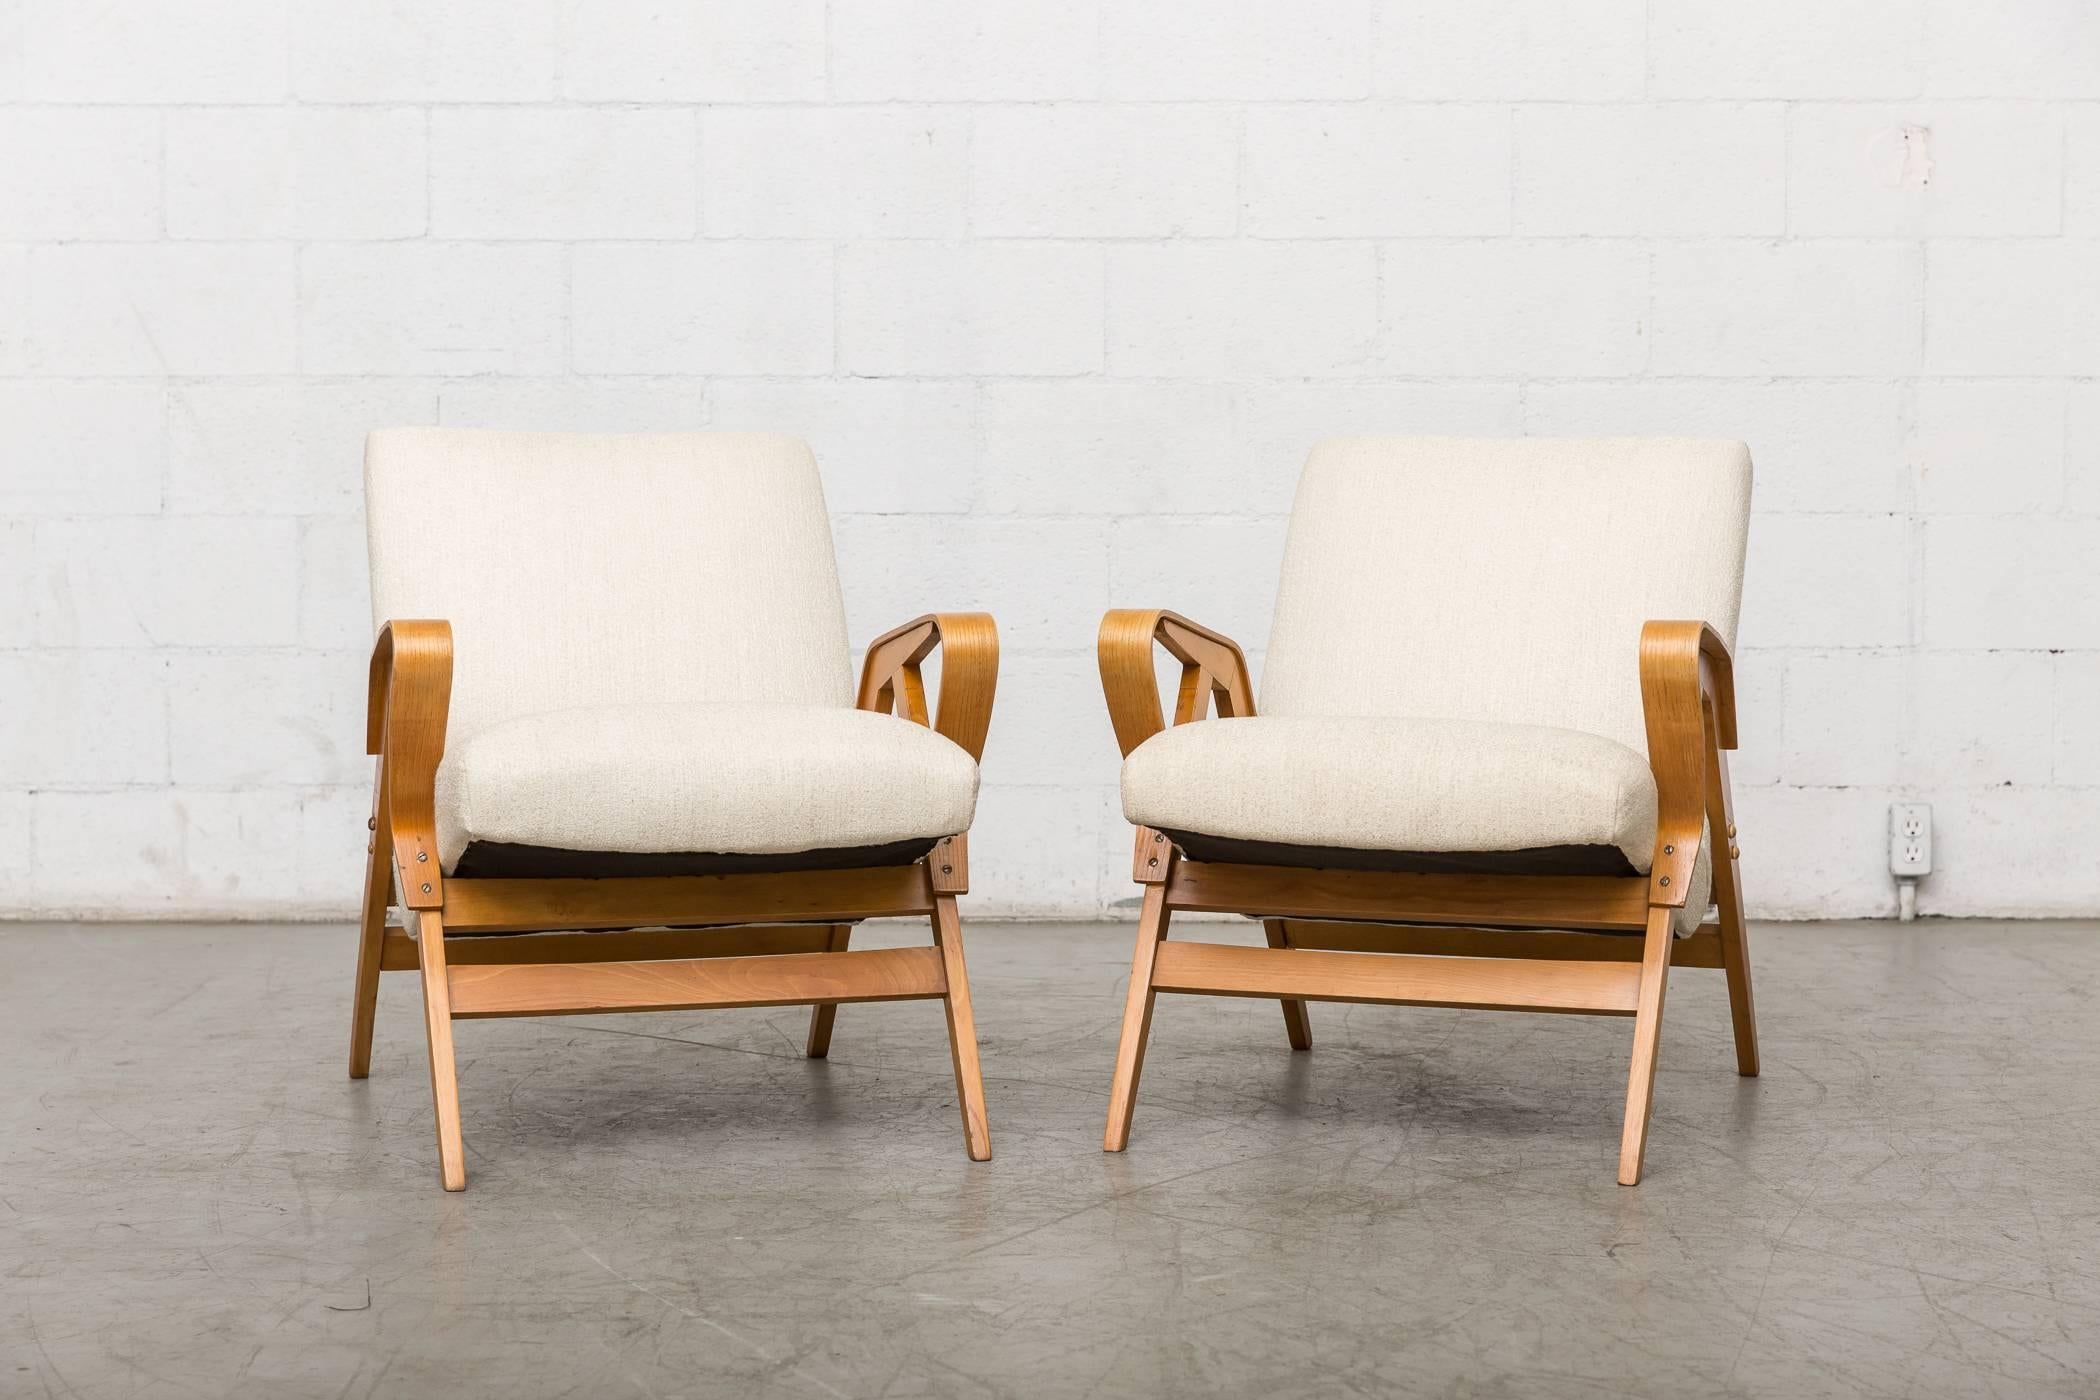 Gorgeous Pair of Tatra Lounge Chairs with Bent Beechwood Arm Rests, 1960s Czechoslovakia. Newly Upholstered in Bone White Fabric. Frames in Original Condition. Set Price.